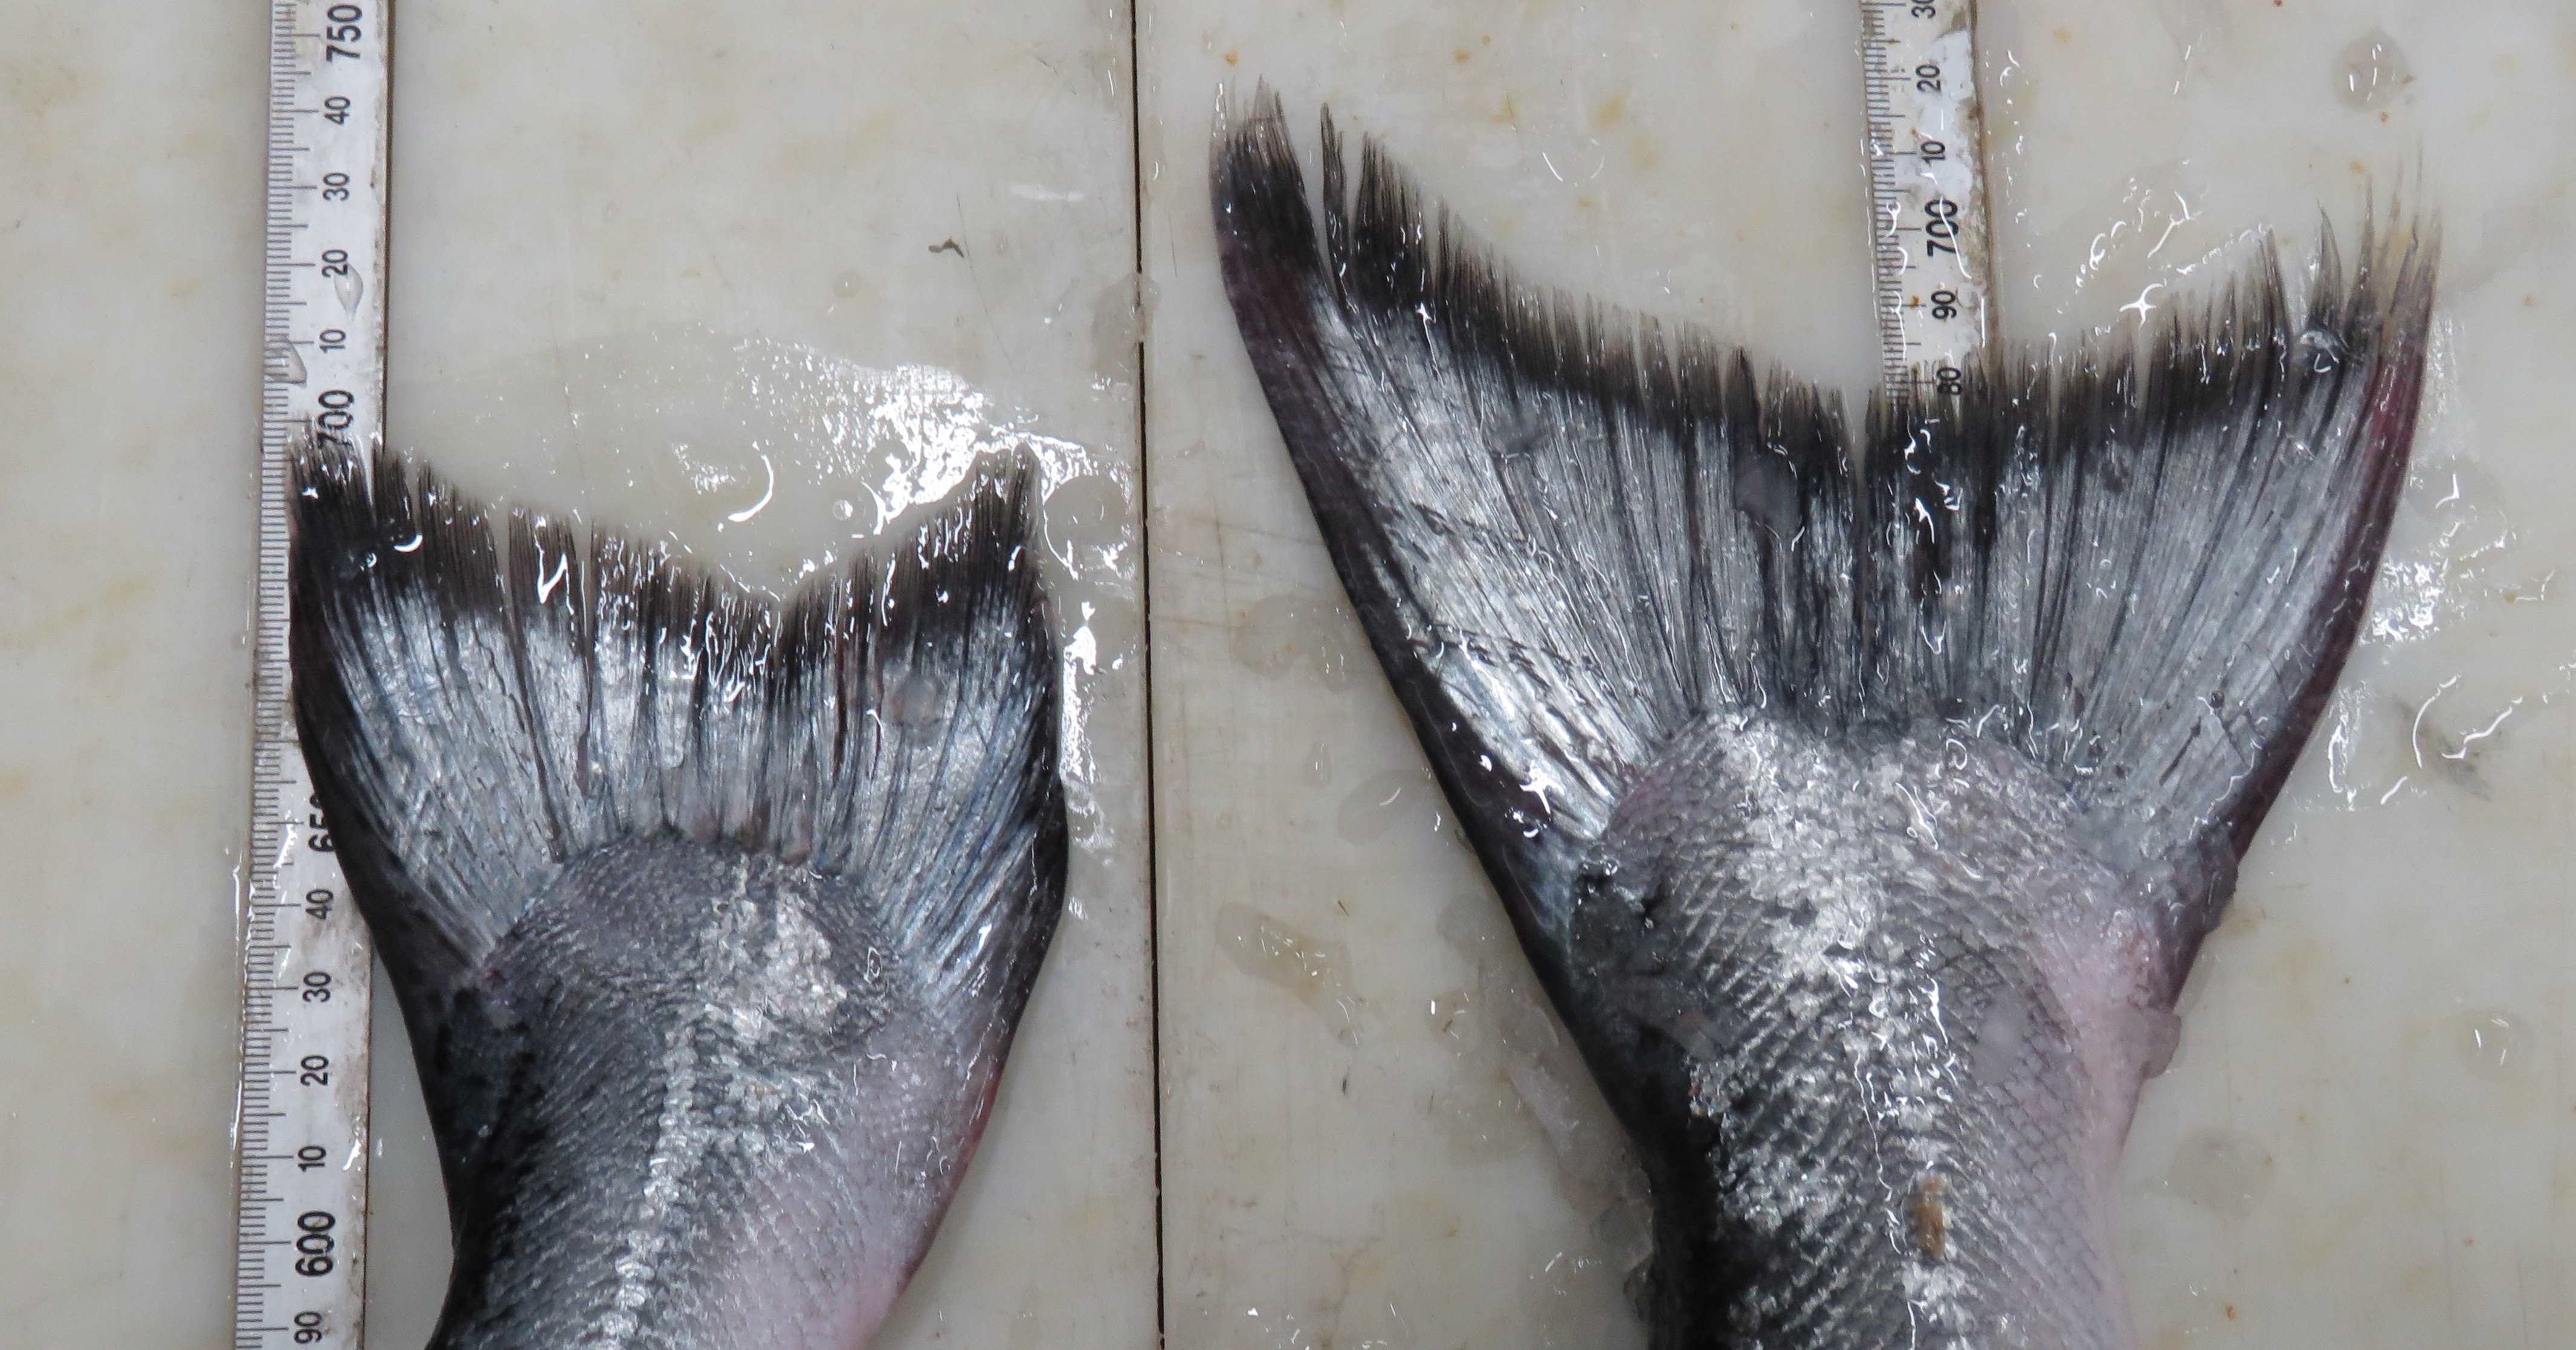 RLcsi2DEC17farmed salmon with worn down tail fin on the left and wild salmon with a full tail on the right2